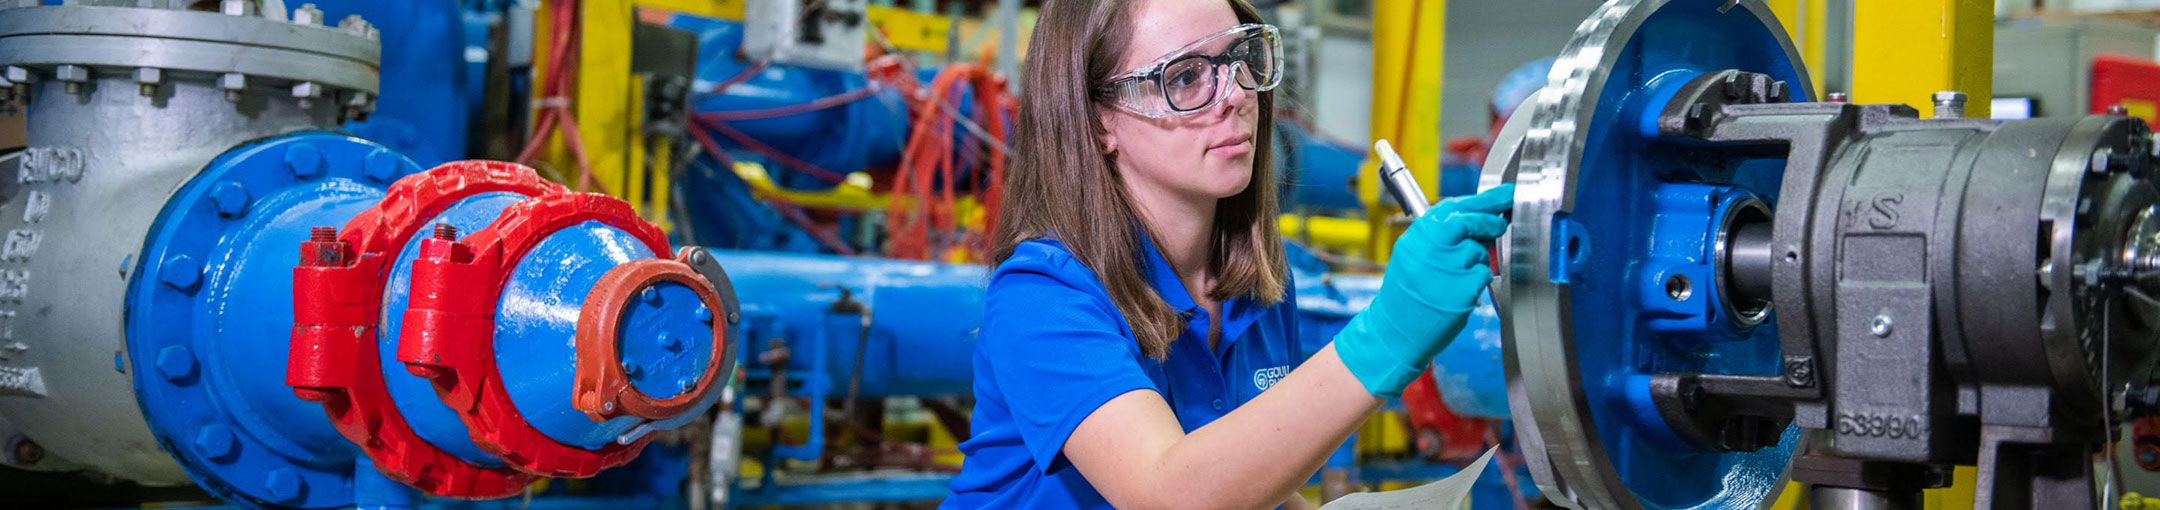 a woman with safety goggles working on large metal pipes